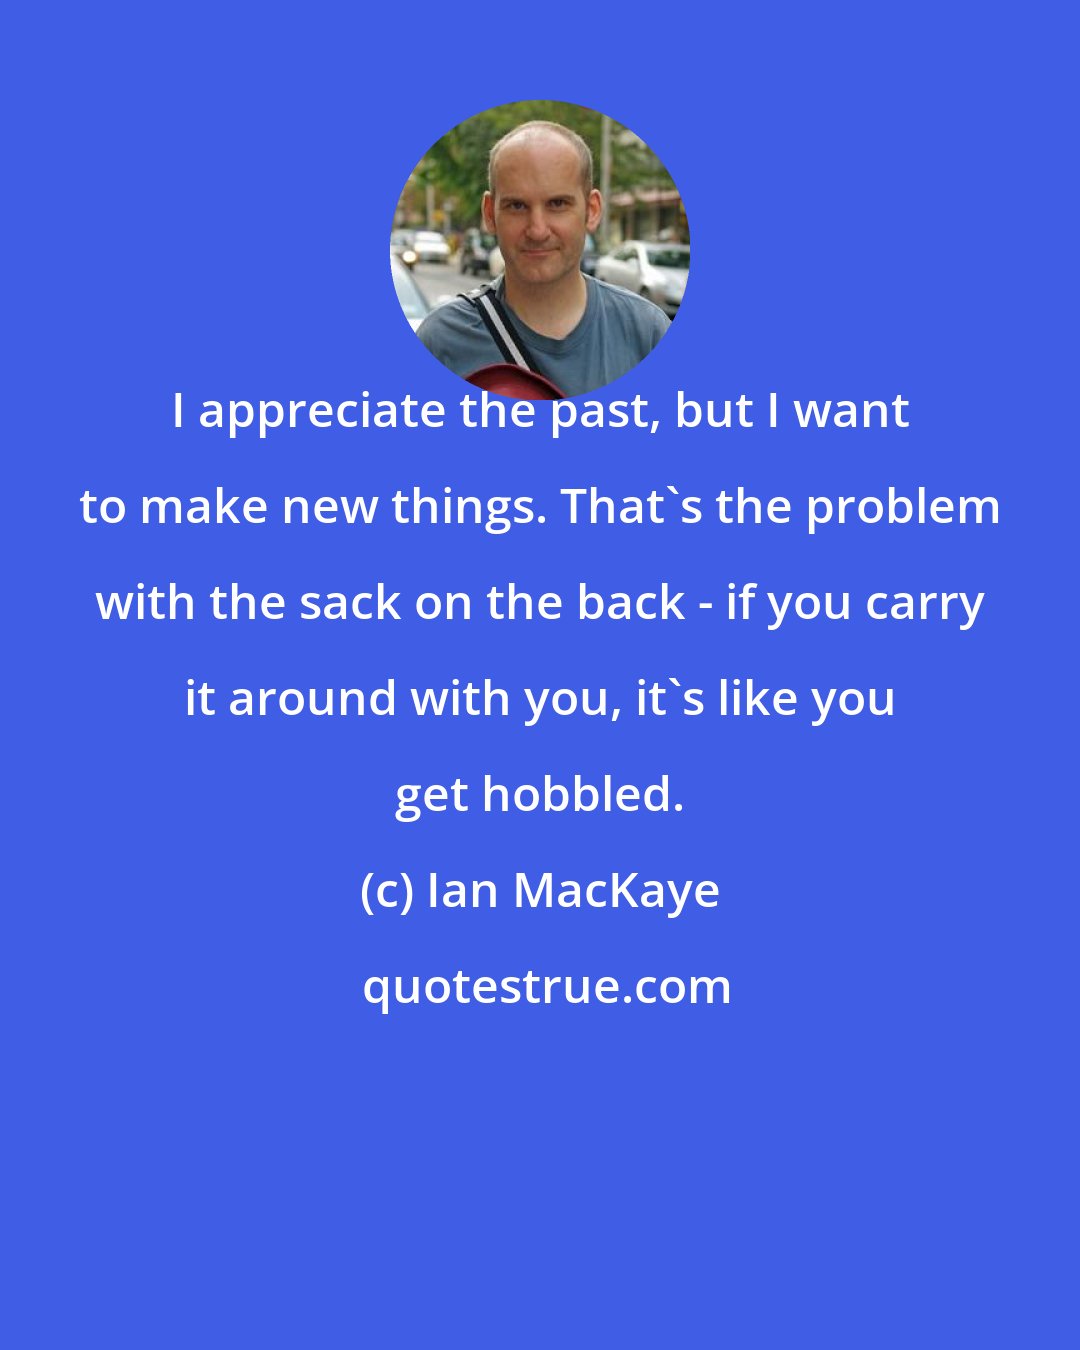 Ian MacKaye: I appreciate the past, but I want to make new things. That's the problem with the sack on the back - if you carry it around with you, it's like you get hobbled.